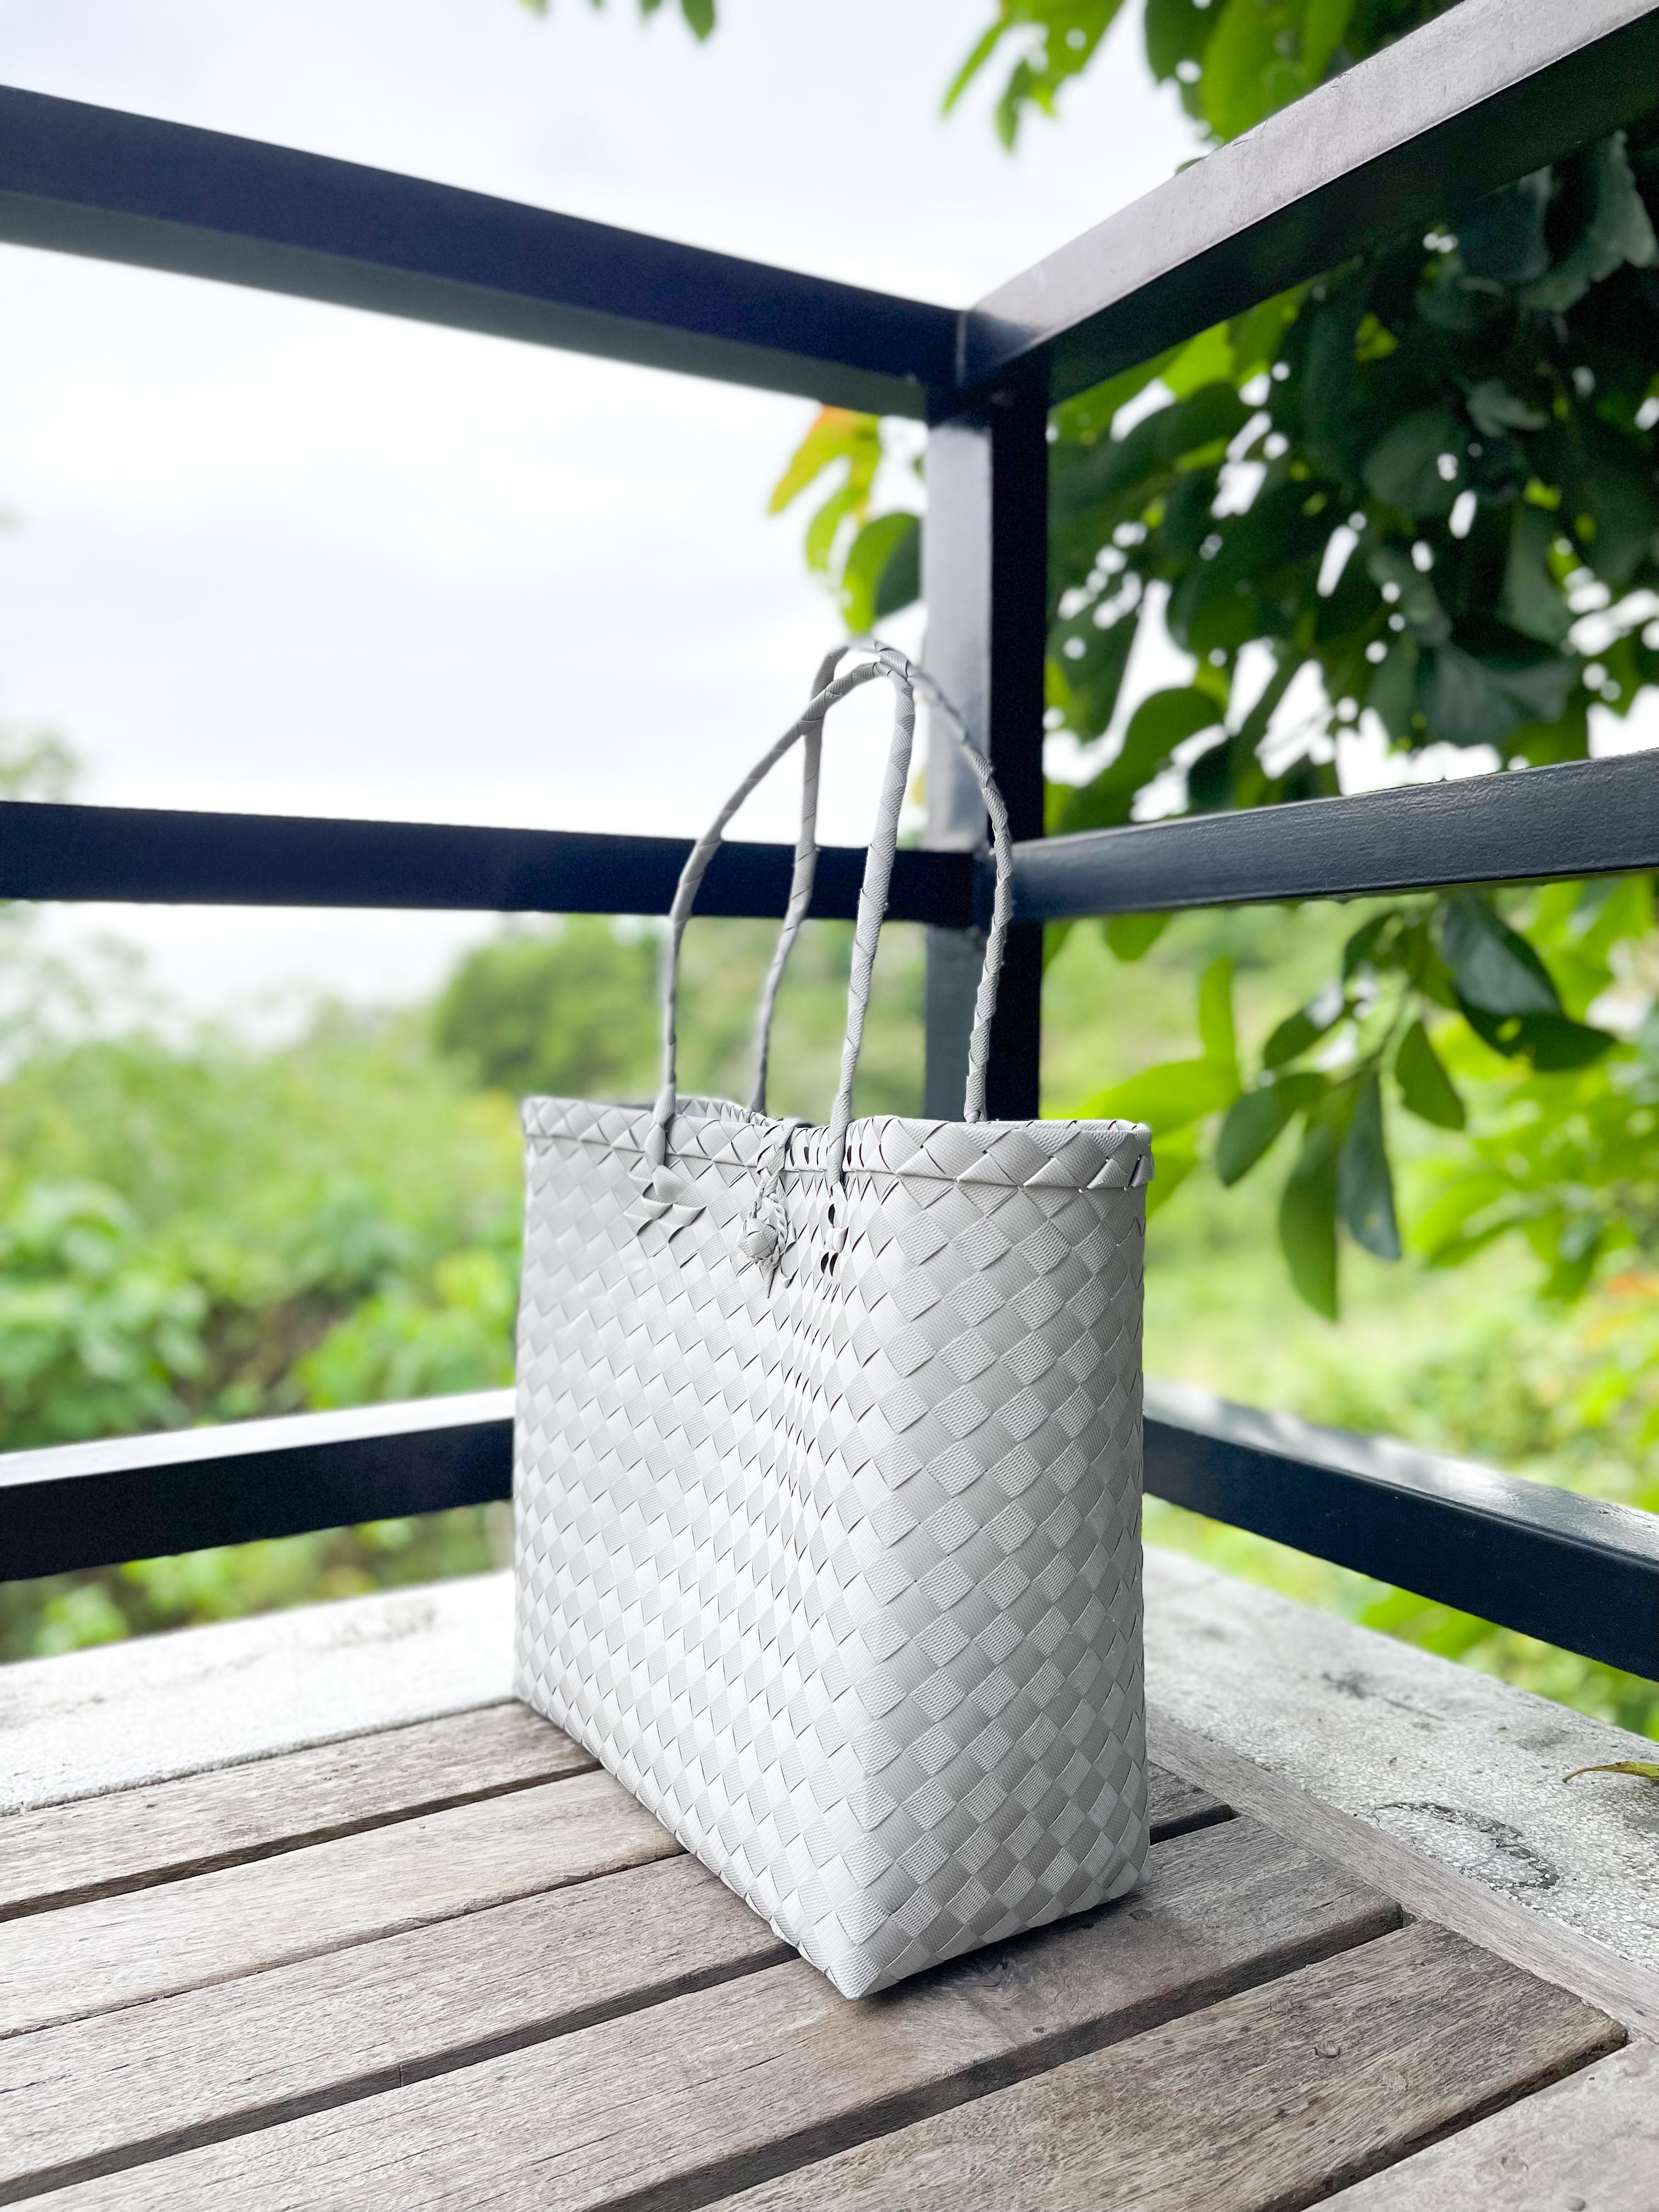 Market Bayong Tote in White